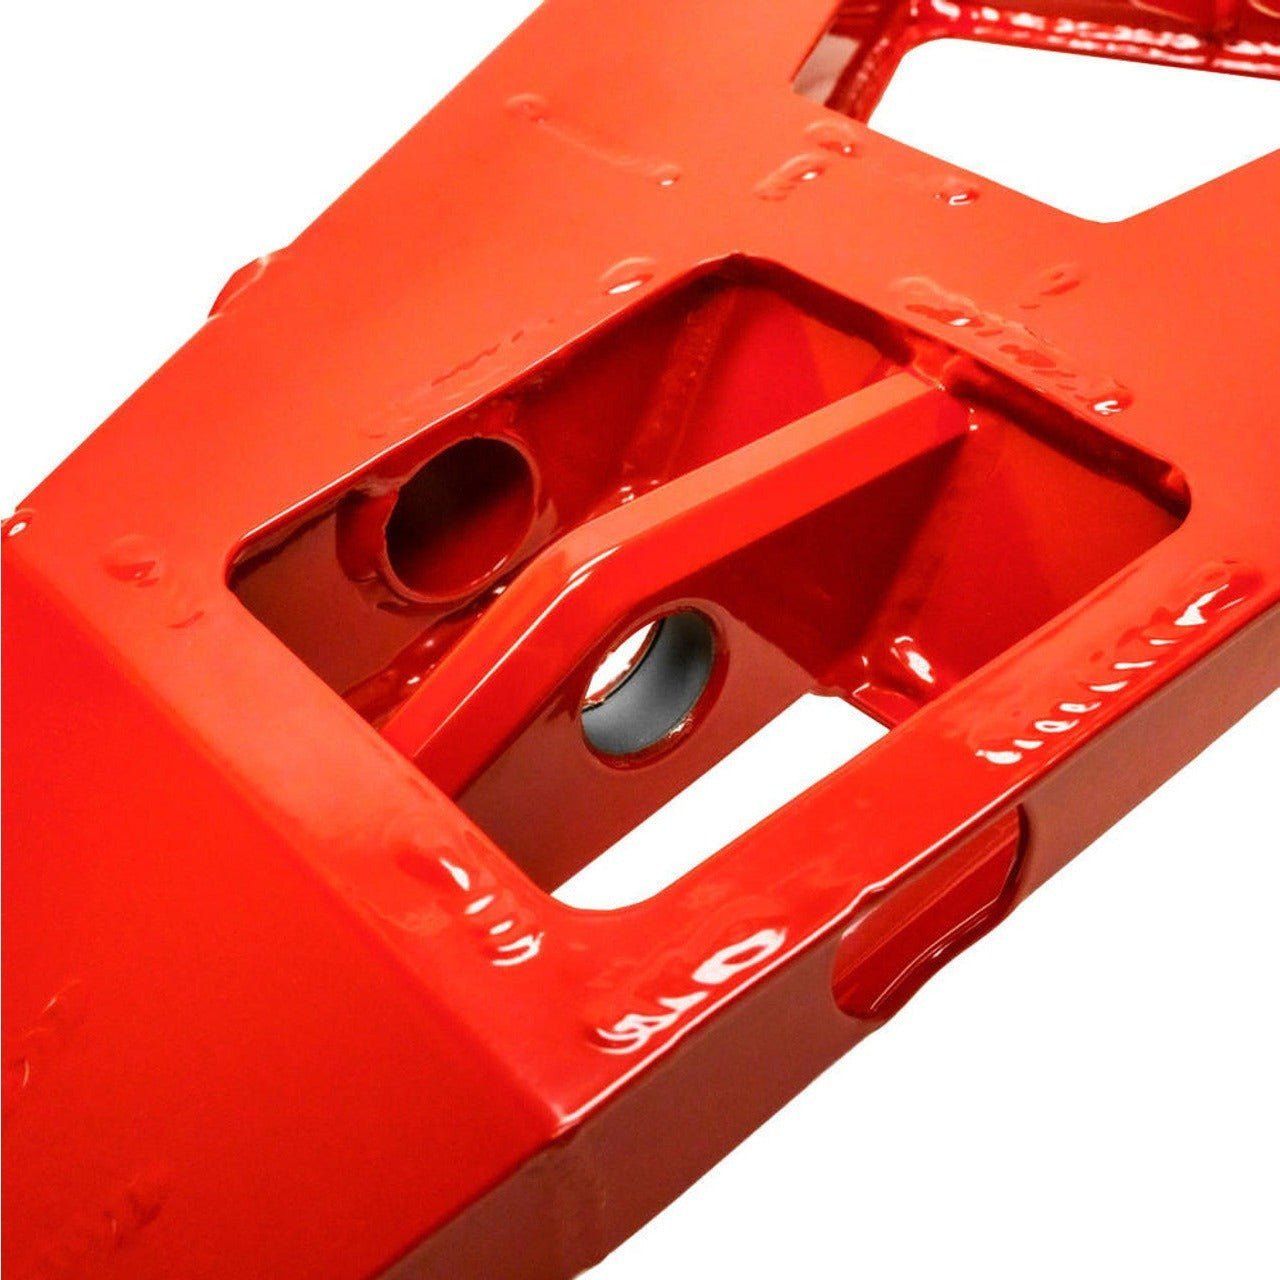 Polaris RZR Pro R High Clearance Boxed Lower A-Arms